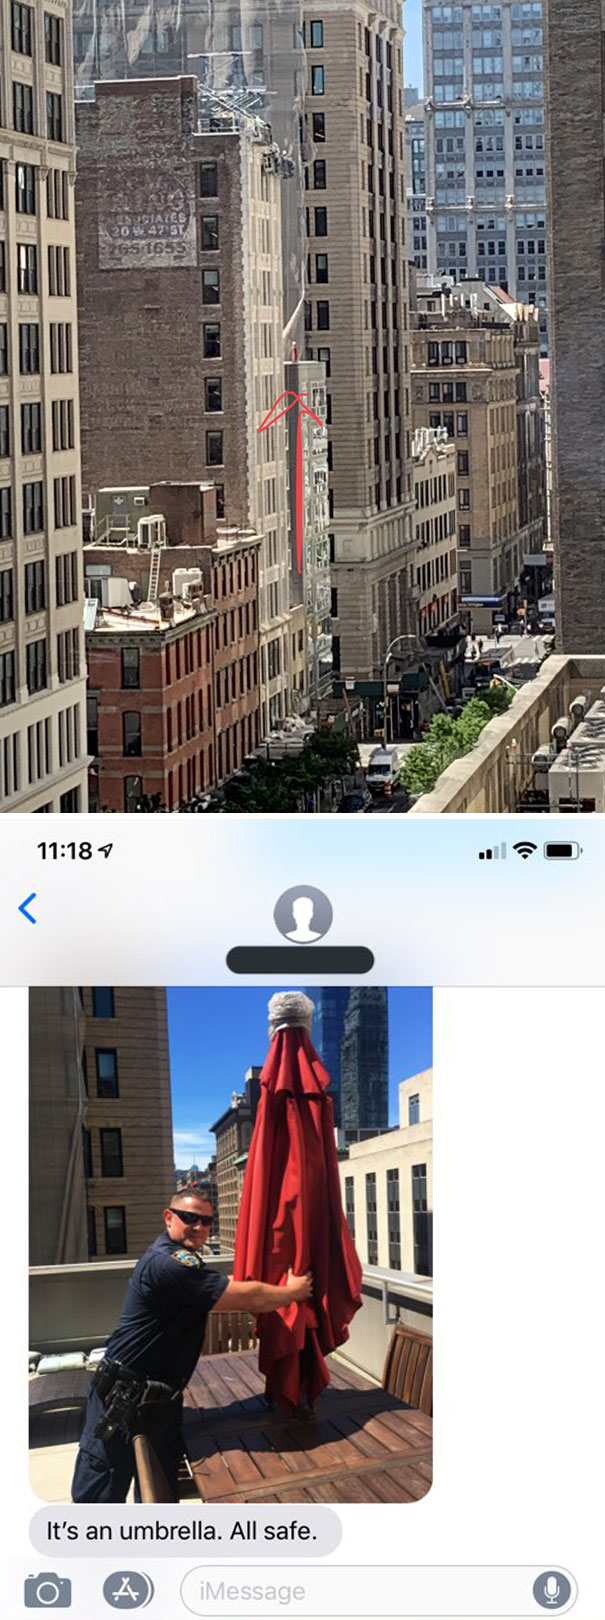 I Thought I Saw A Woman Dressed As A Handmaid About To Jump From A Building. I Called 911